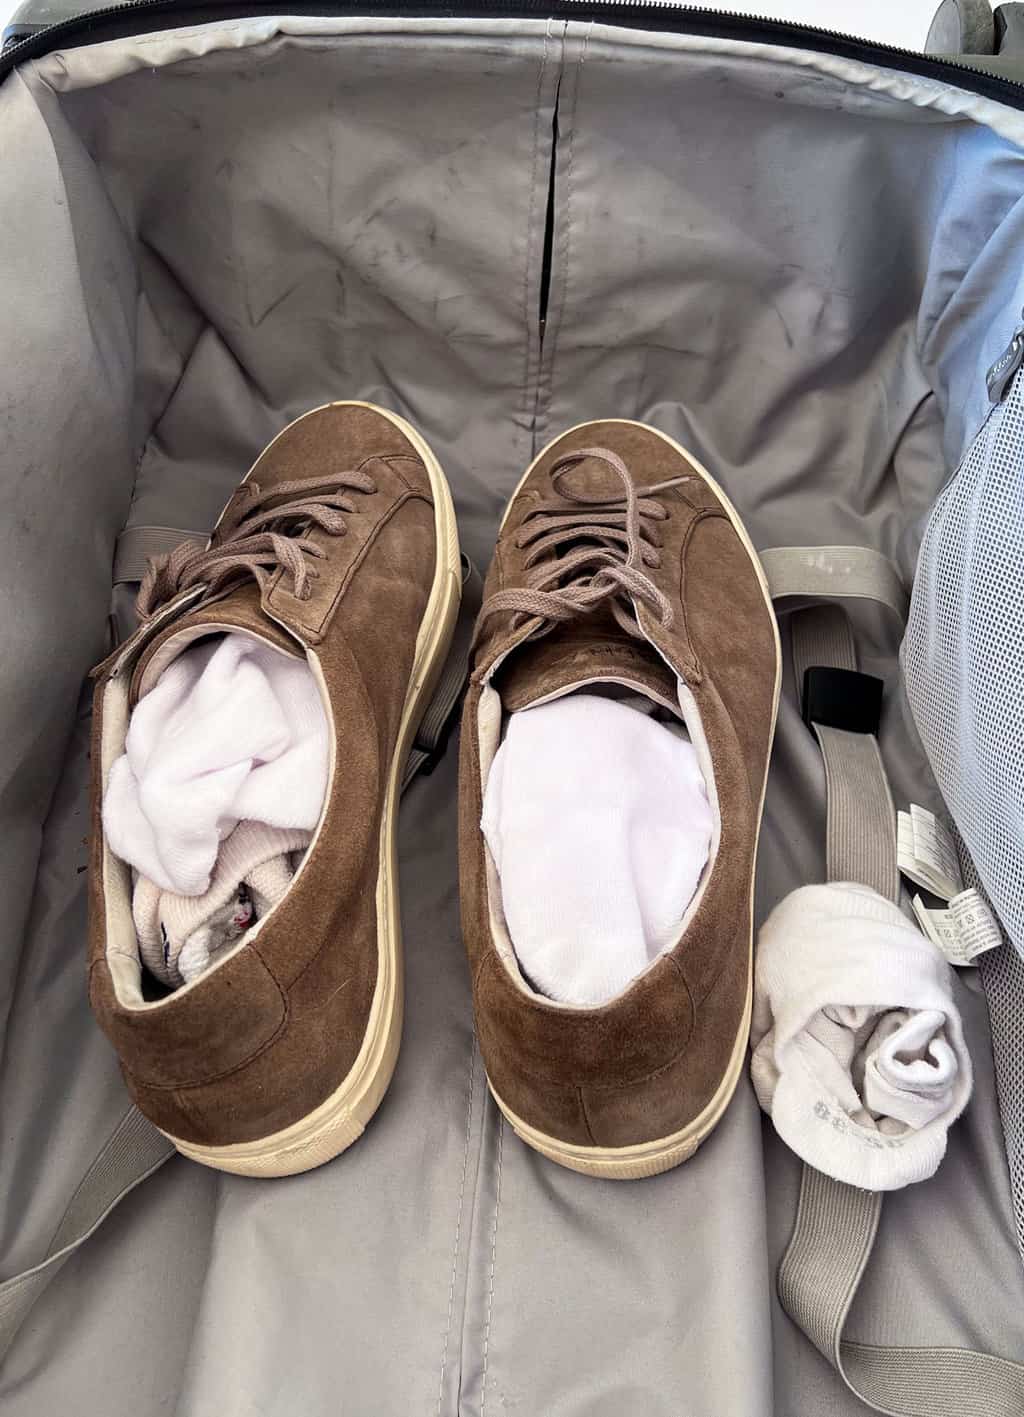 A pair of brown suede sneakers in a suitcase. The sneakers are stuffed with white socks. 